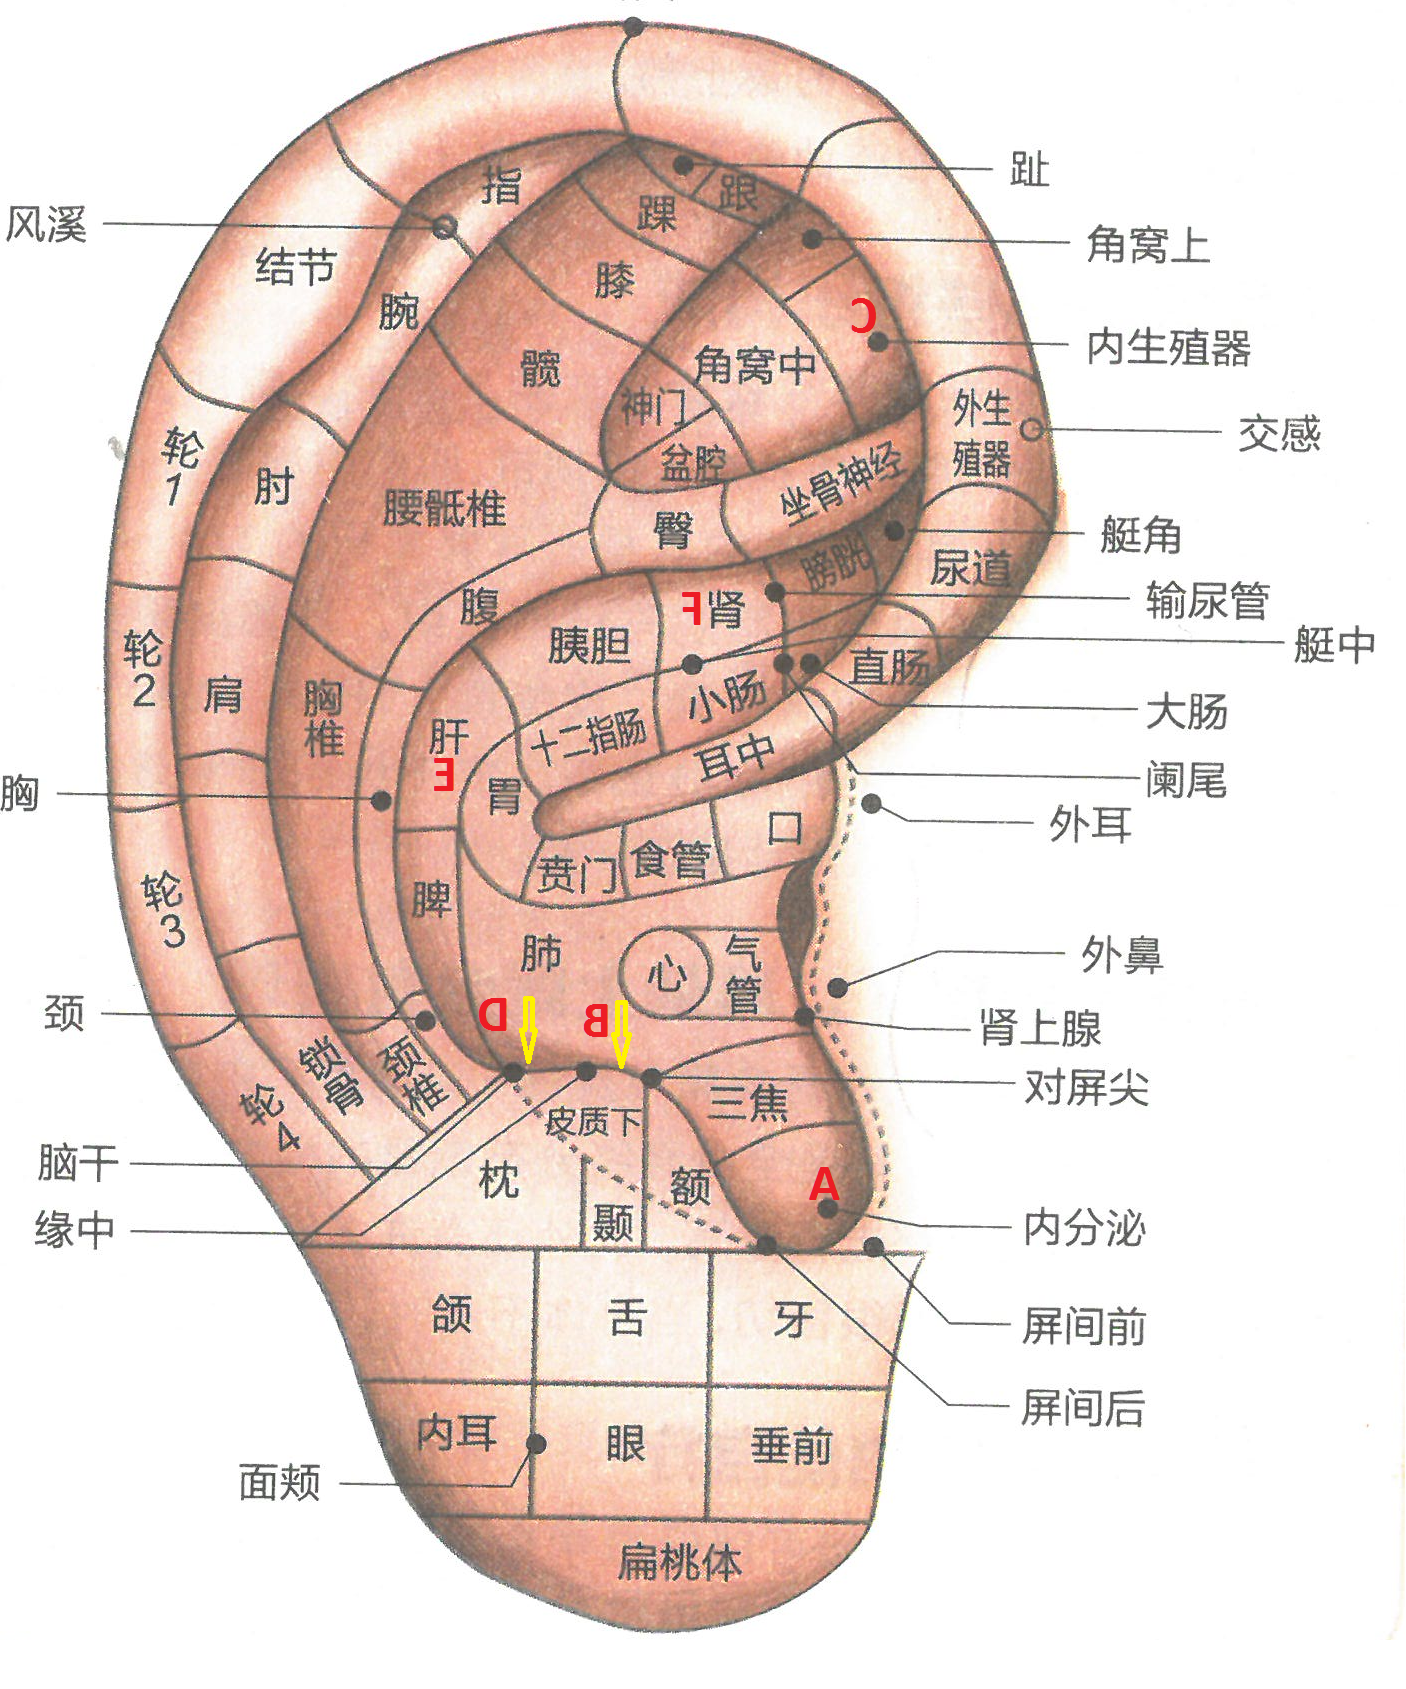 auricular points for missed periods